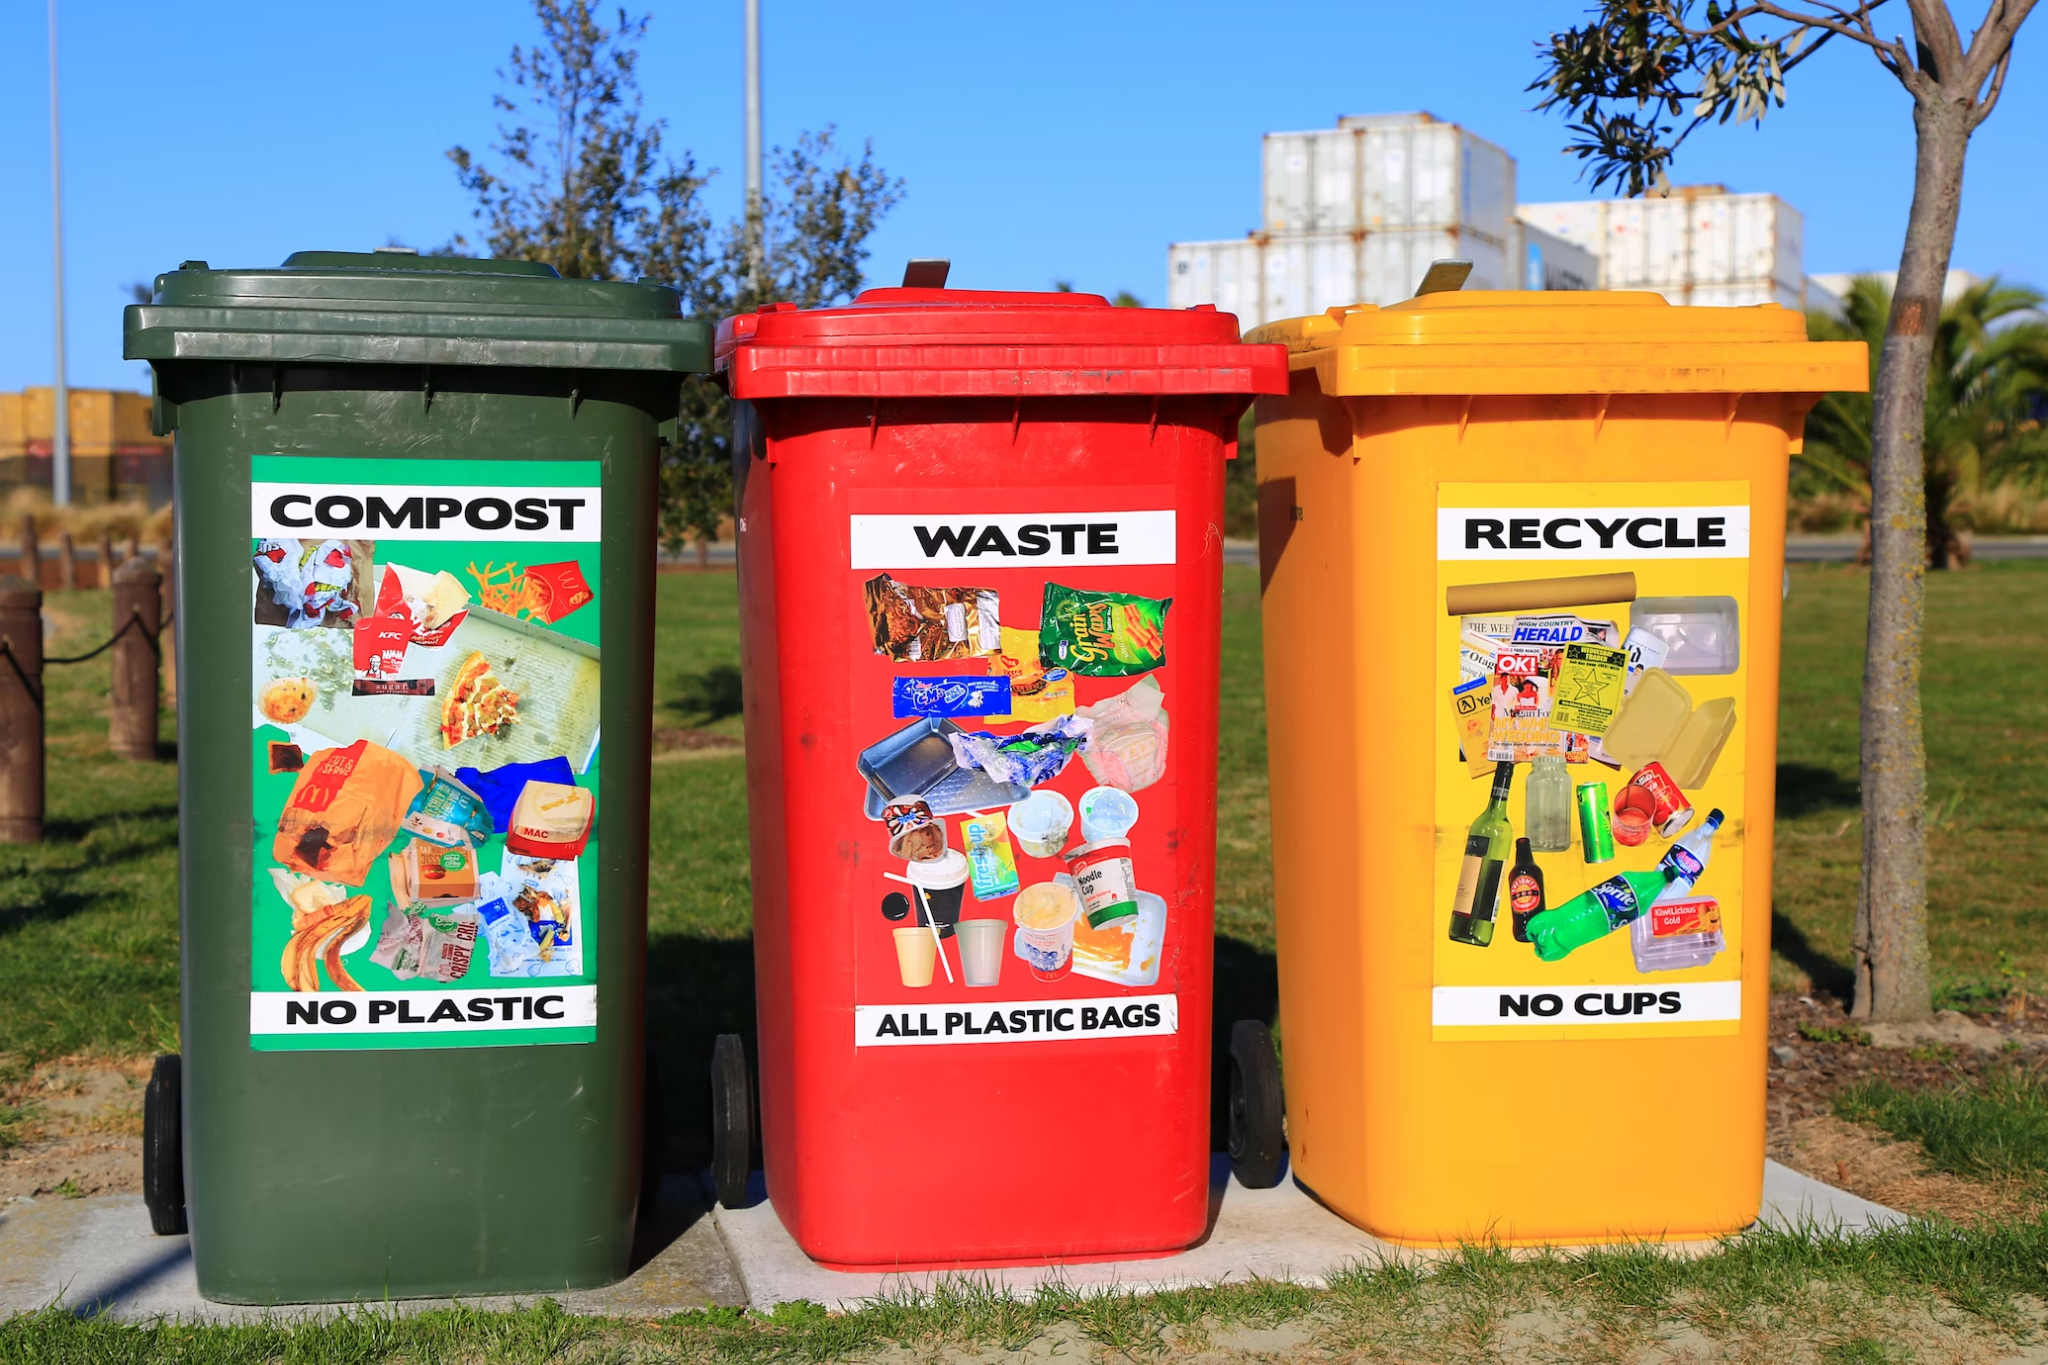 Green compost bin, red waste bin, and yellow recycle bin with illustrated instructions for proper waste disposal in a park setting.